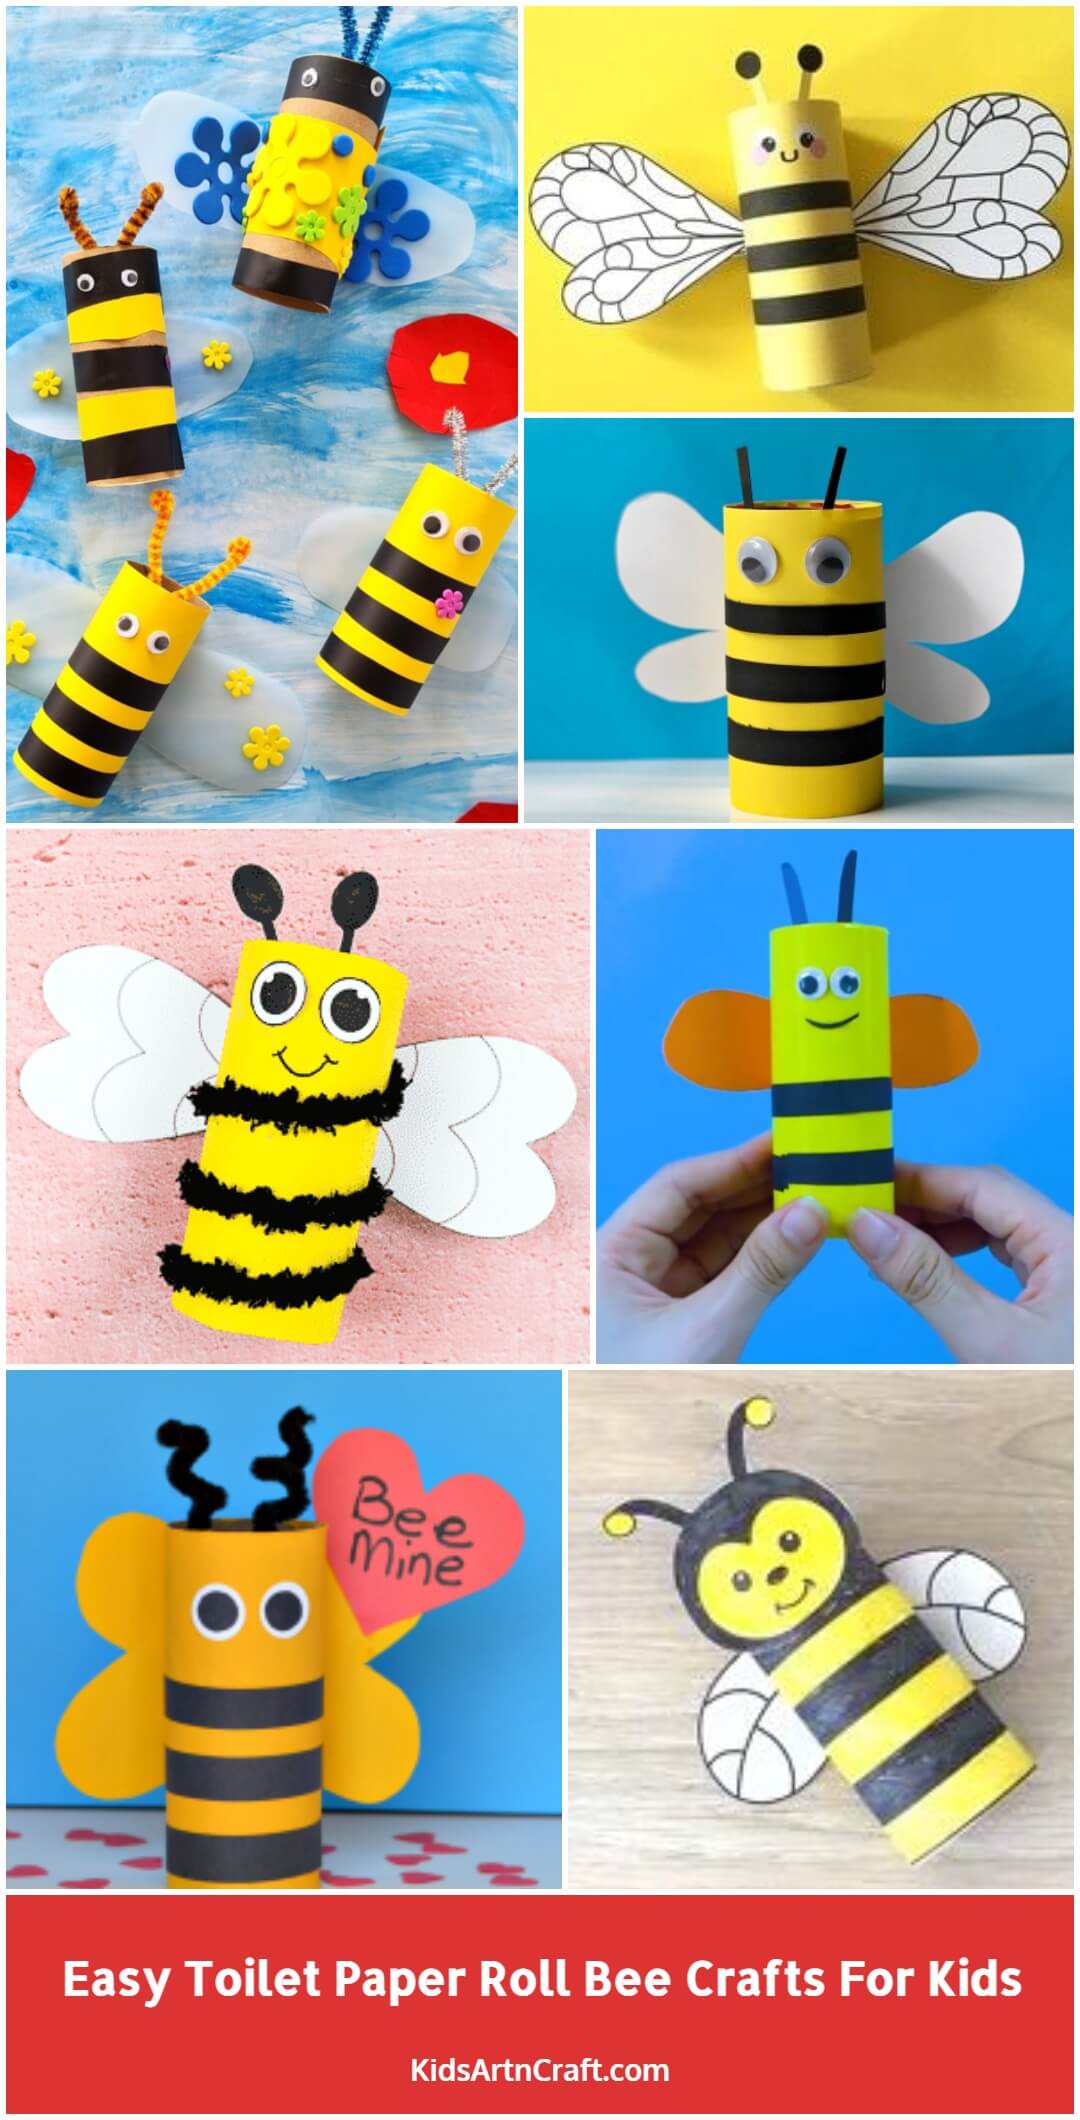 Easy Toilet Paper Roll Bee Crafts For Kids